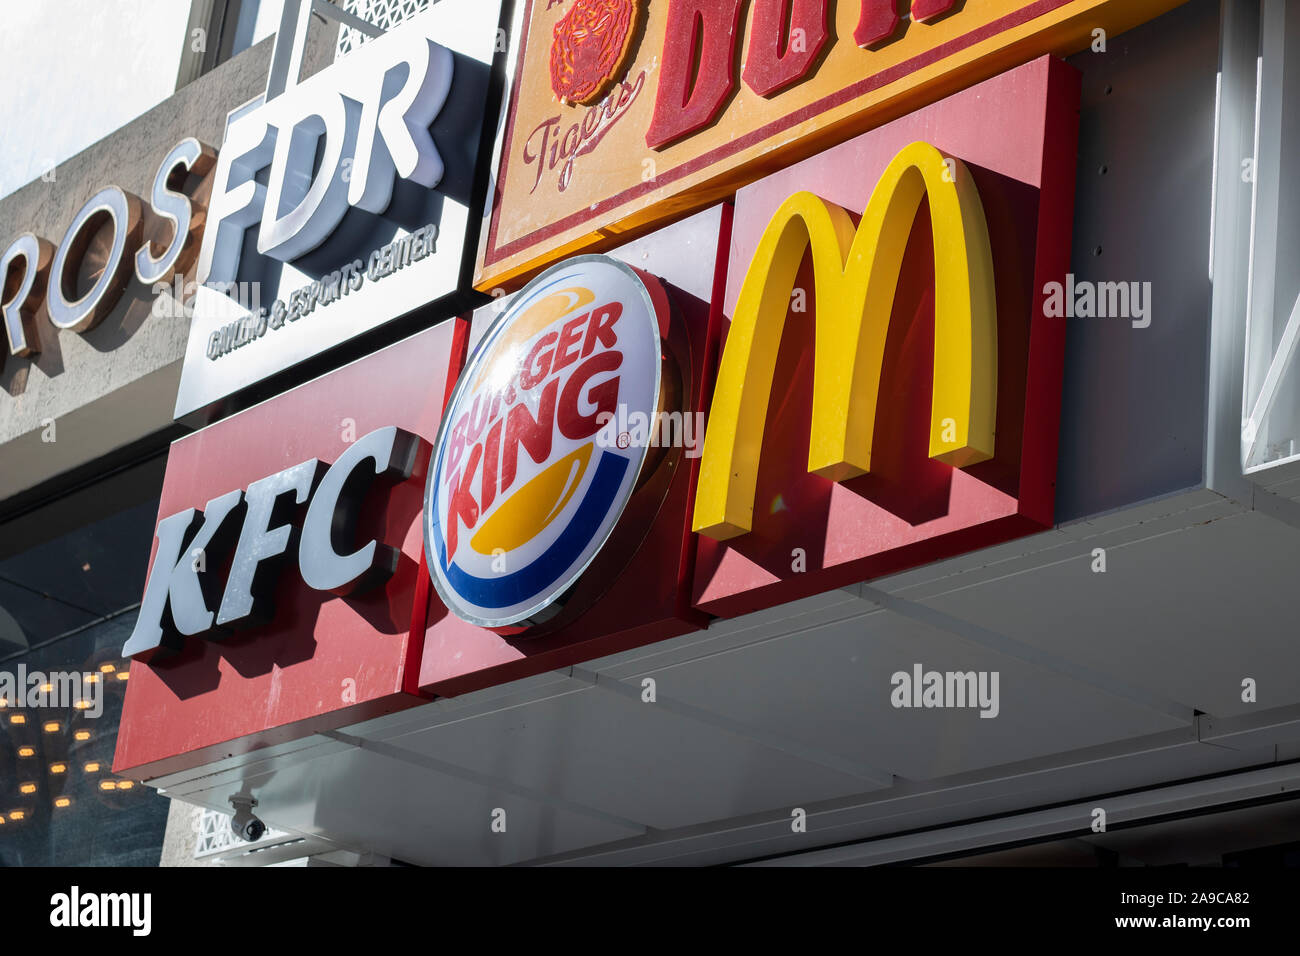 Istiklal, Turkey - October-13,2019: McDonalds, Kfc, Burger King logos hanging on the sign on the wall of the building together. Taken from the sidelin Stock Photo